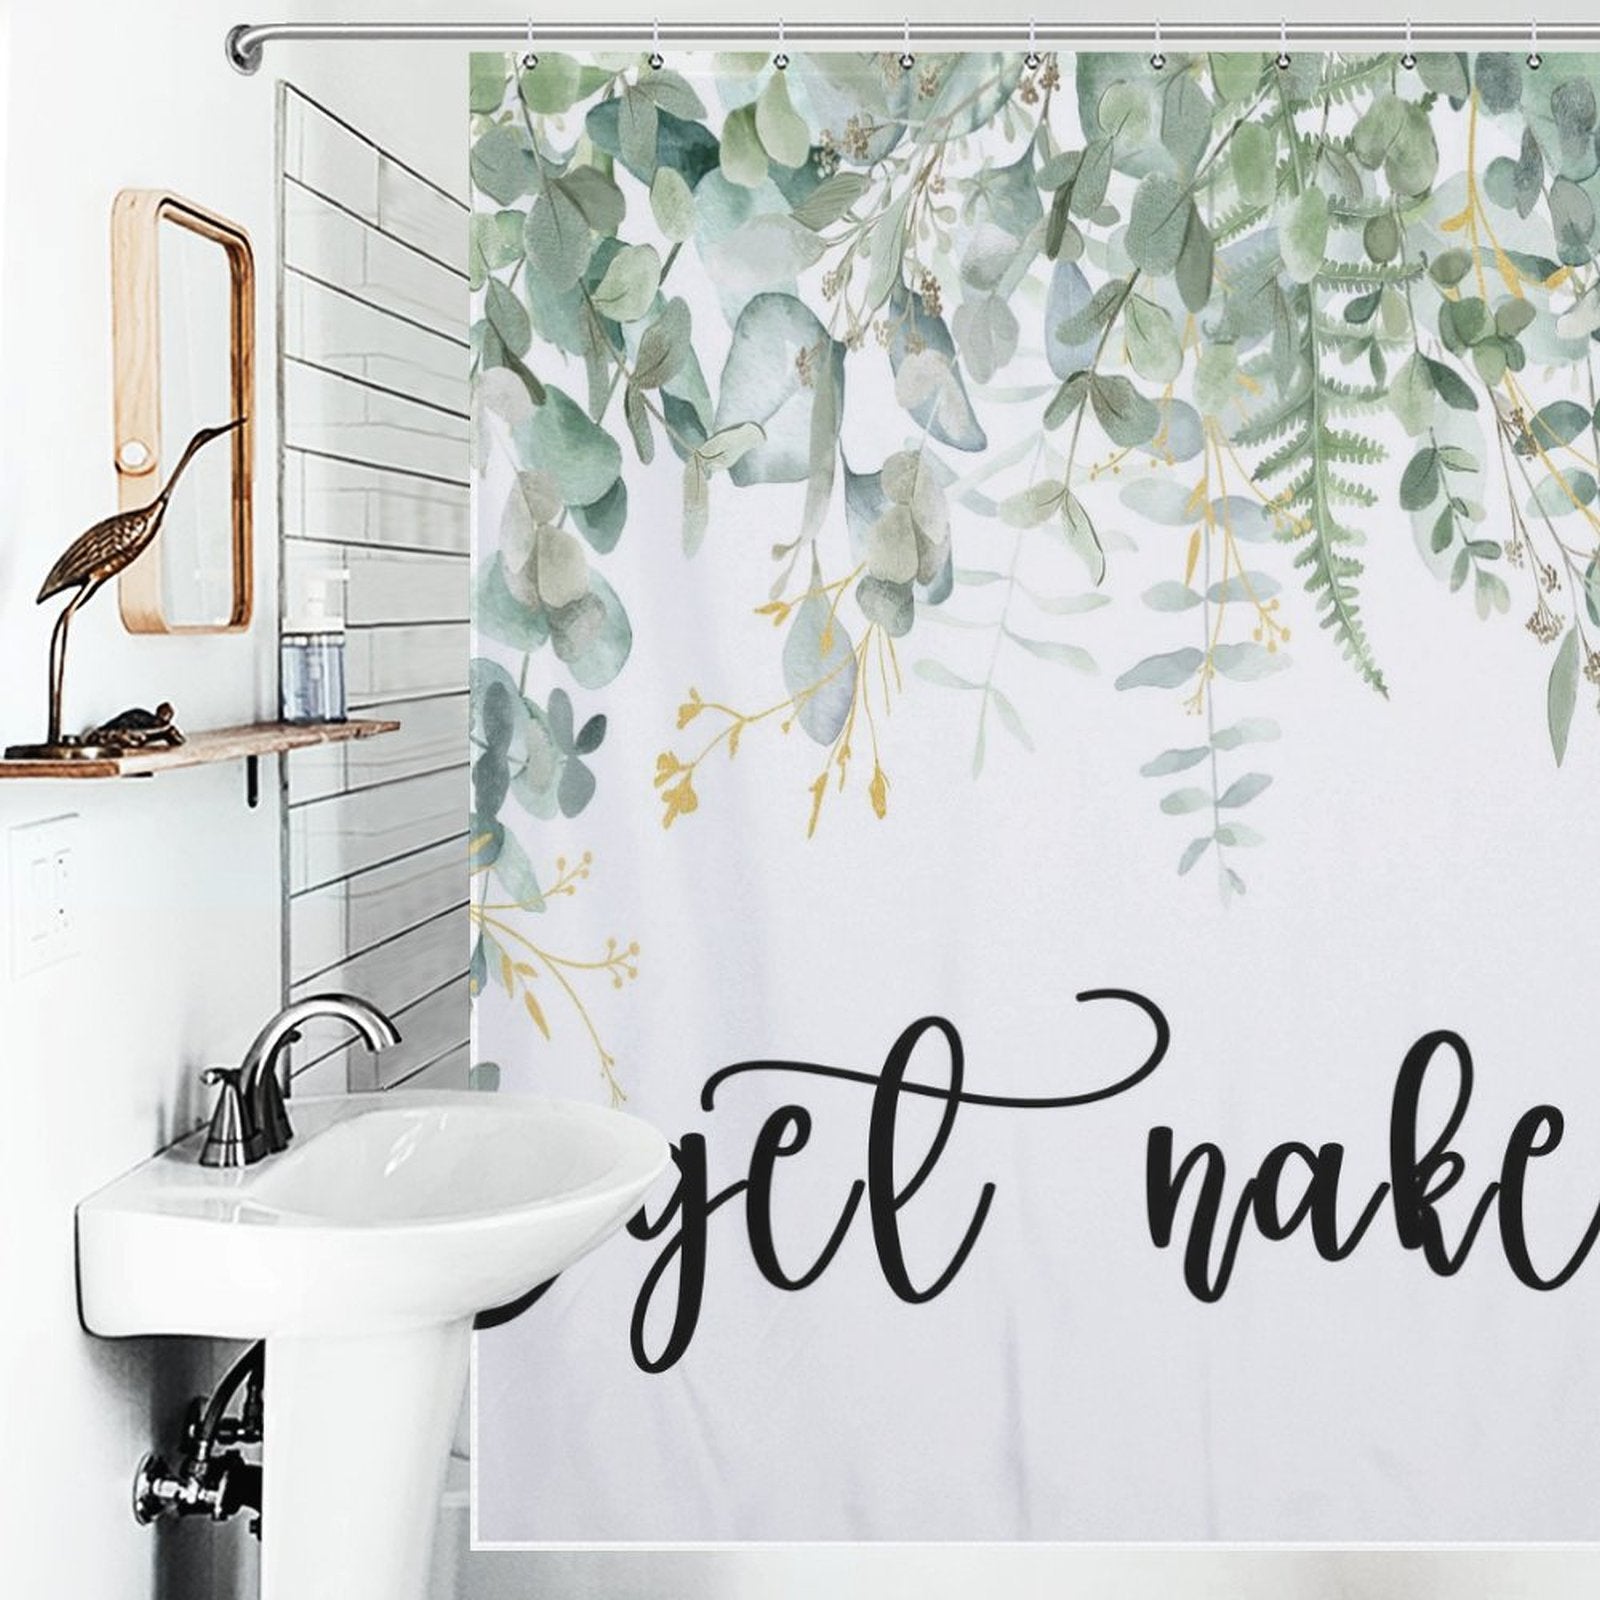 Bathroom with a white sink and a nature-themed shower curtain featuring eucalyptus leaves prints and the phrase "Get Naked" in cursive writing. A wooden bird sculpture is placed on a shelf beside the mirror.